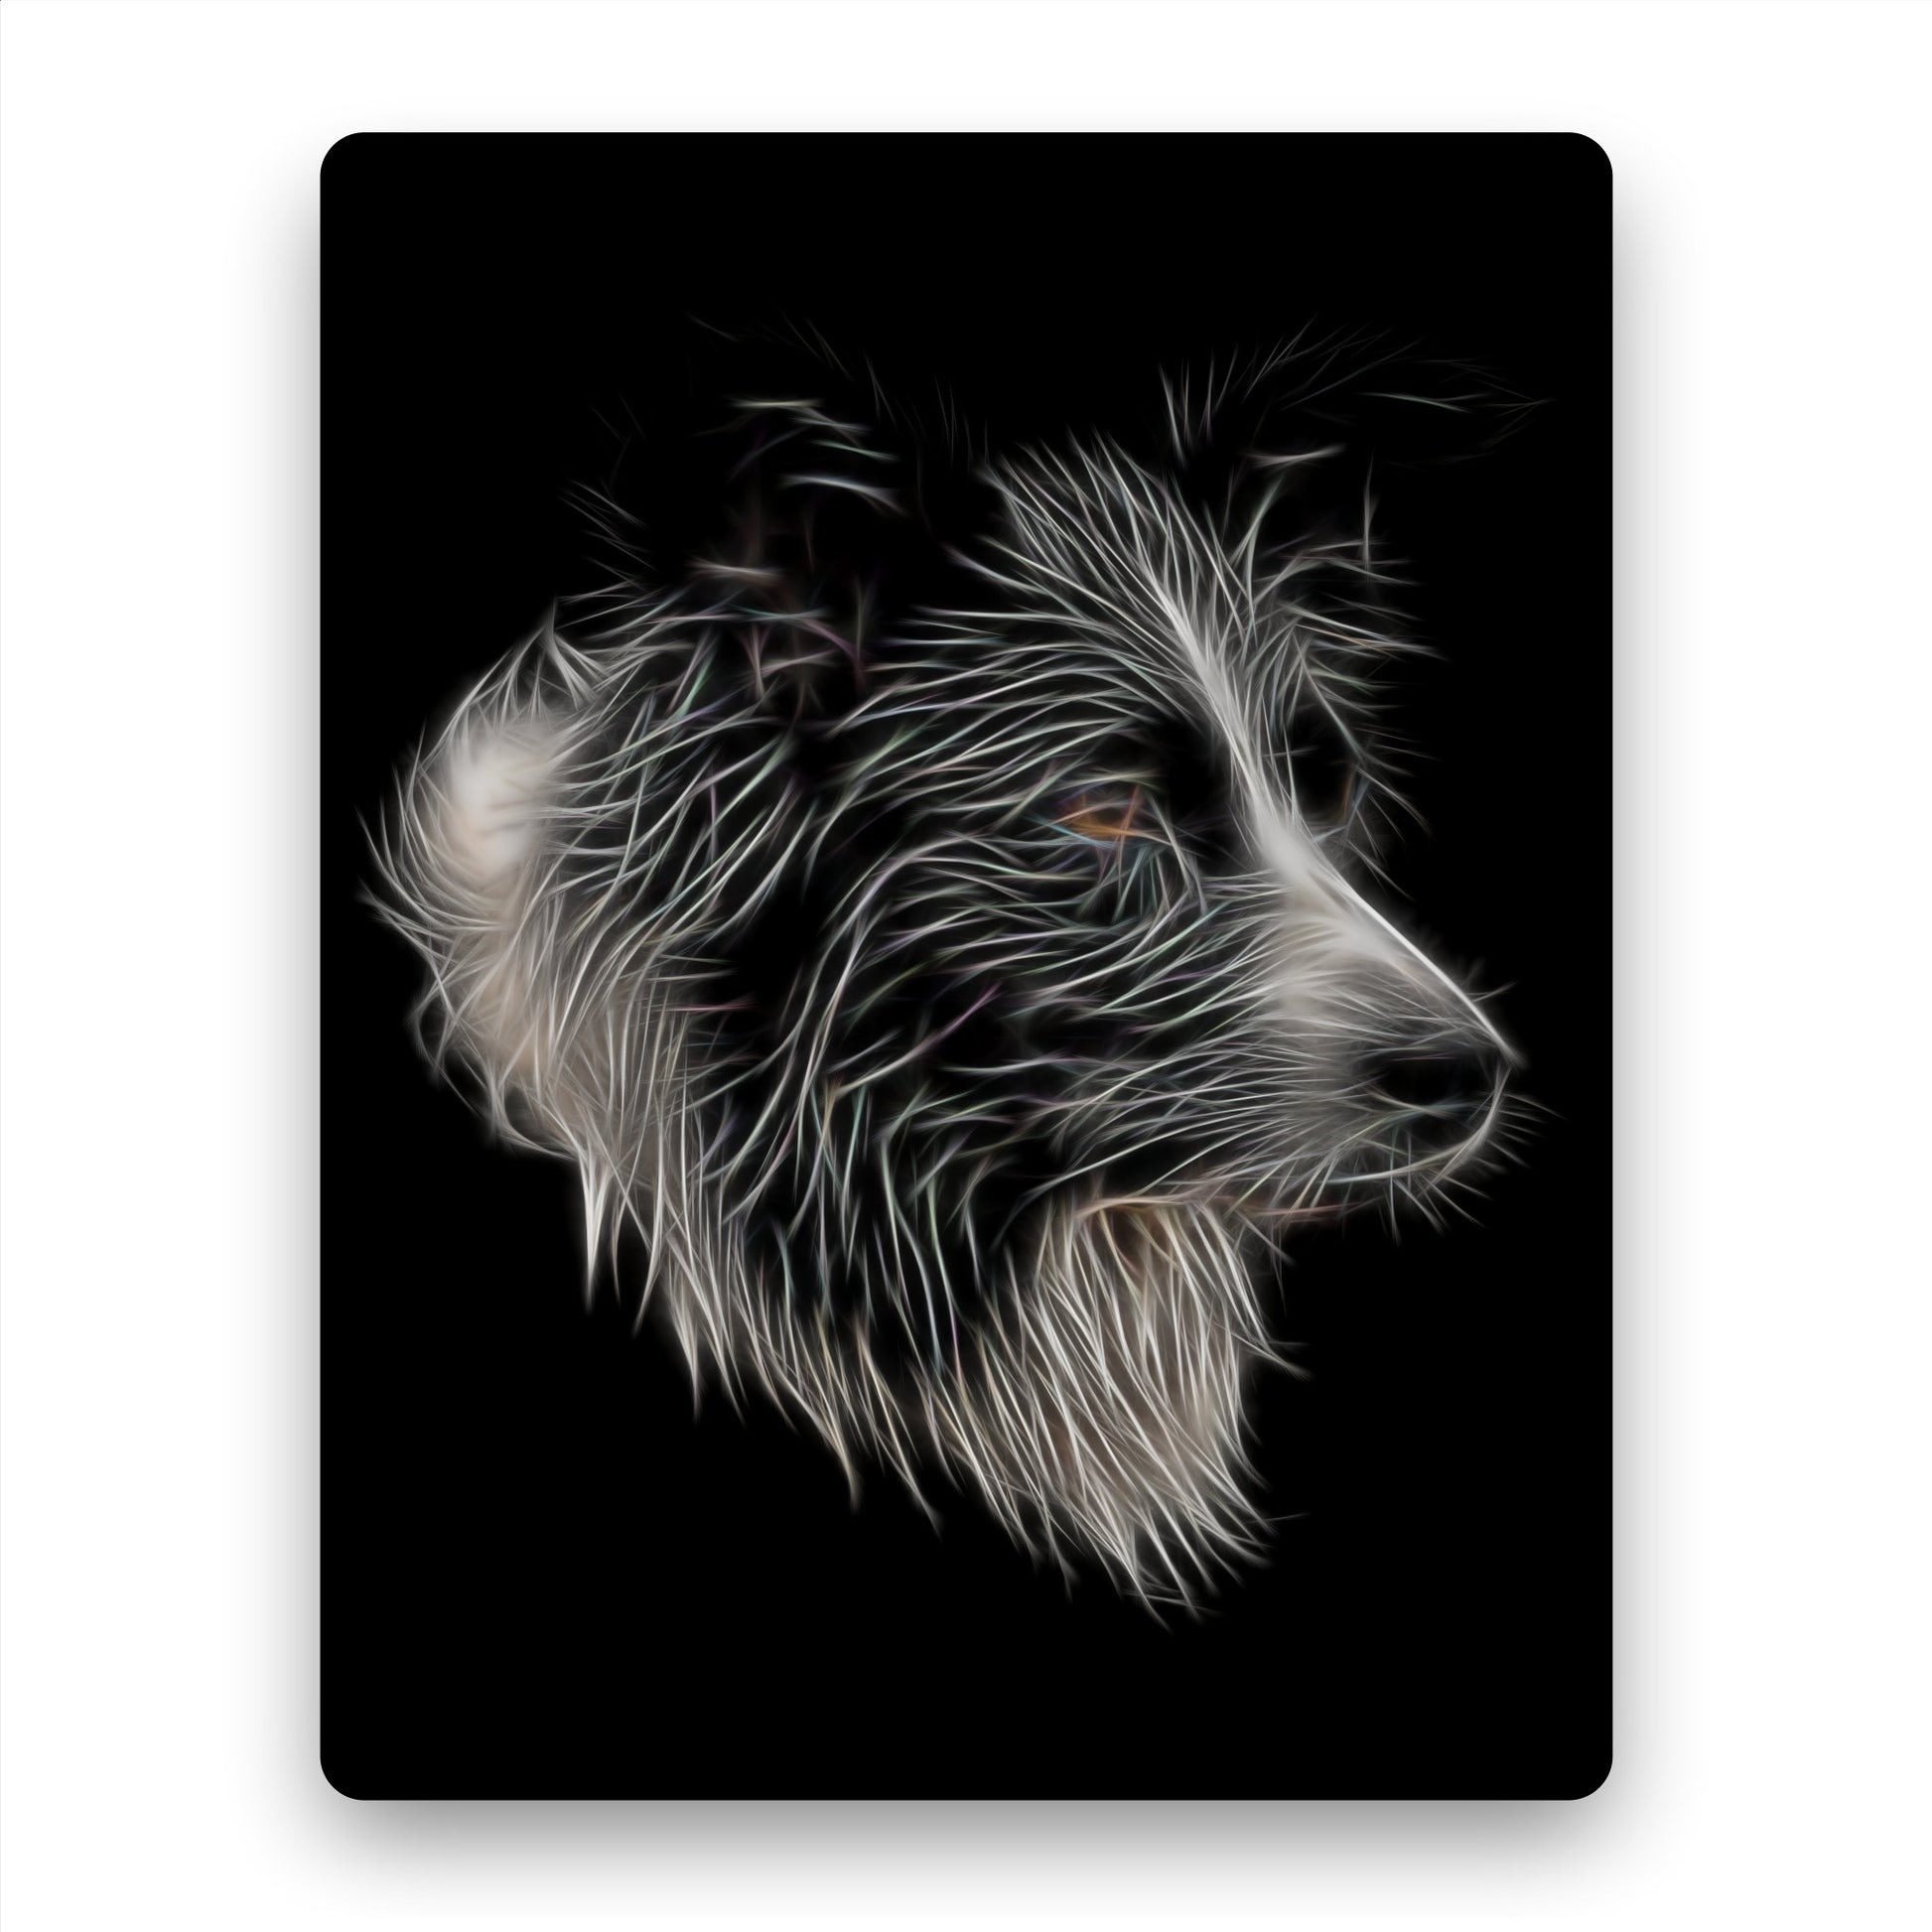 Border Collie Metal Wall Plaque with Fractal Art Design. Perfect Gift for dog Owner